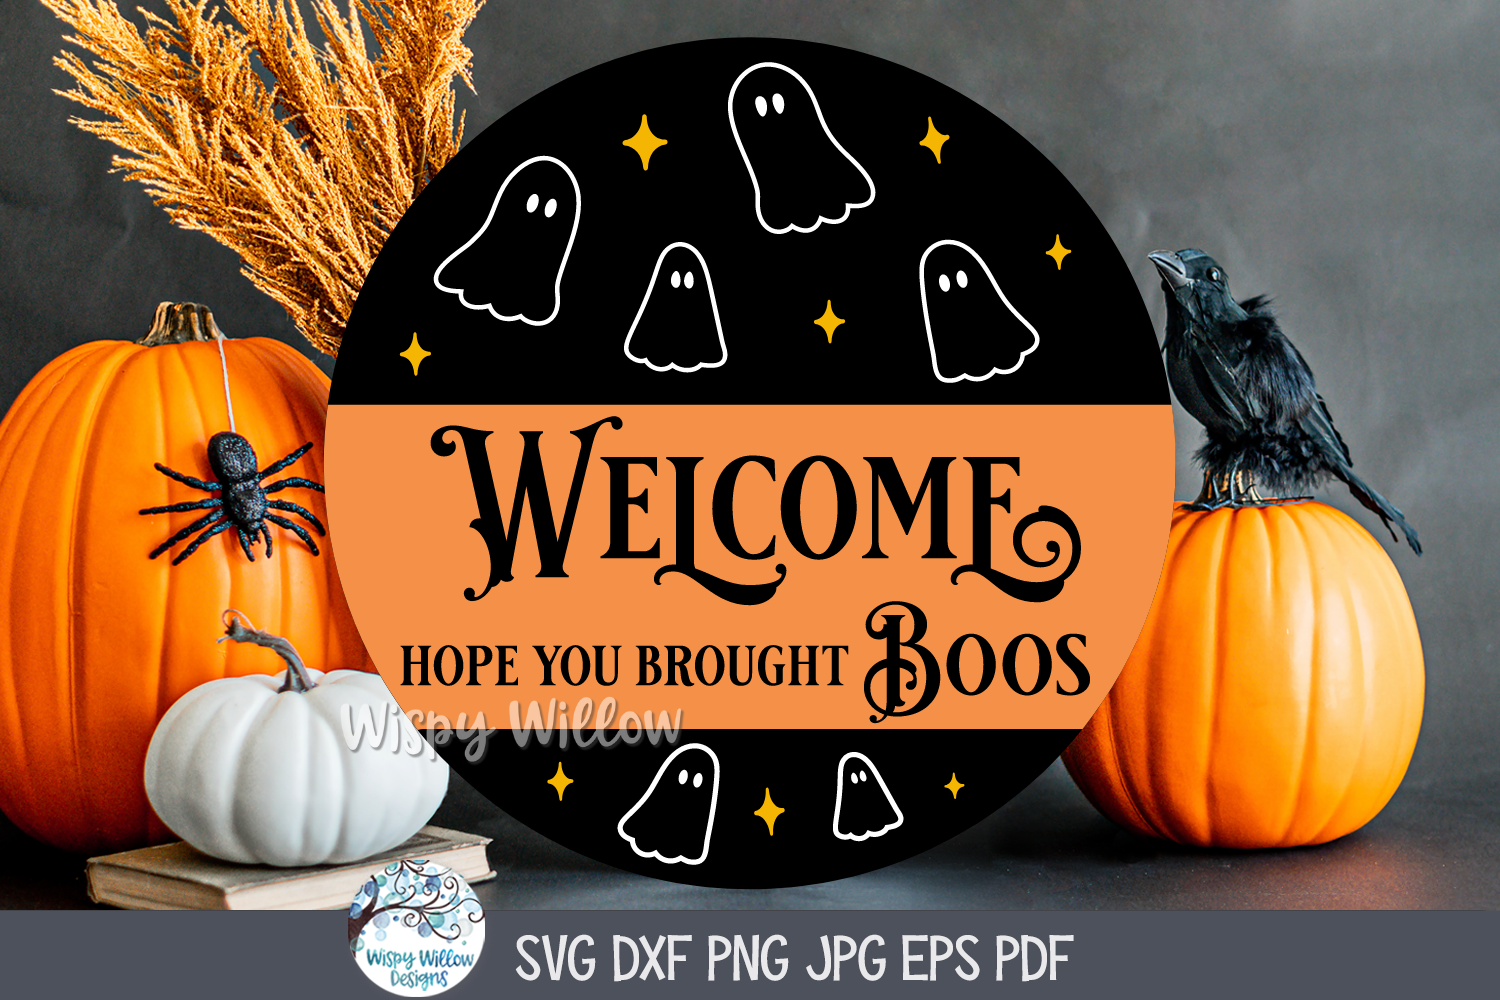 Welcome Hope You Brought Boos SVG| Halloween Greeting Design